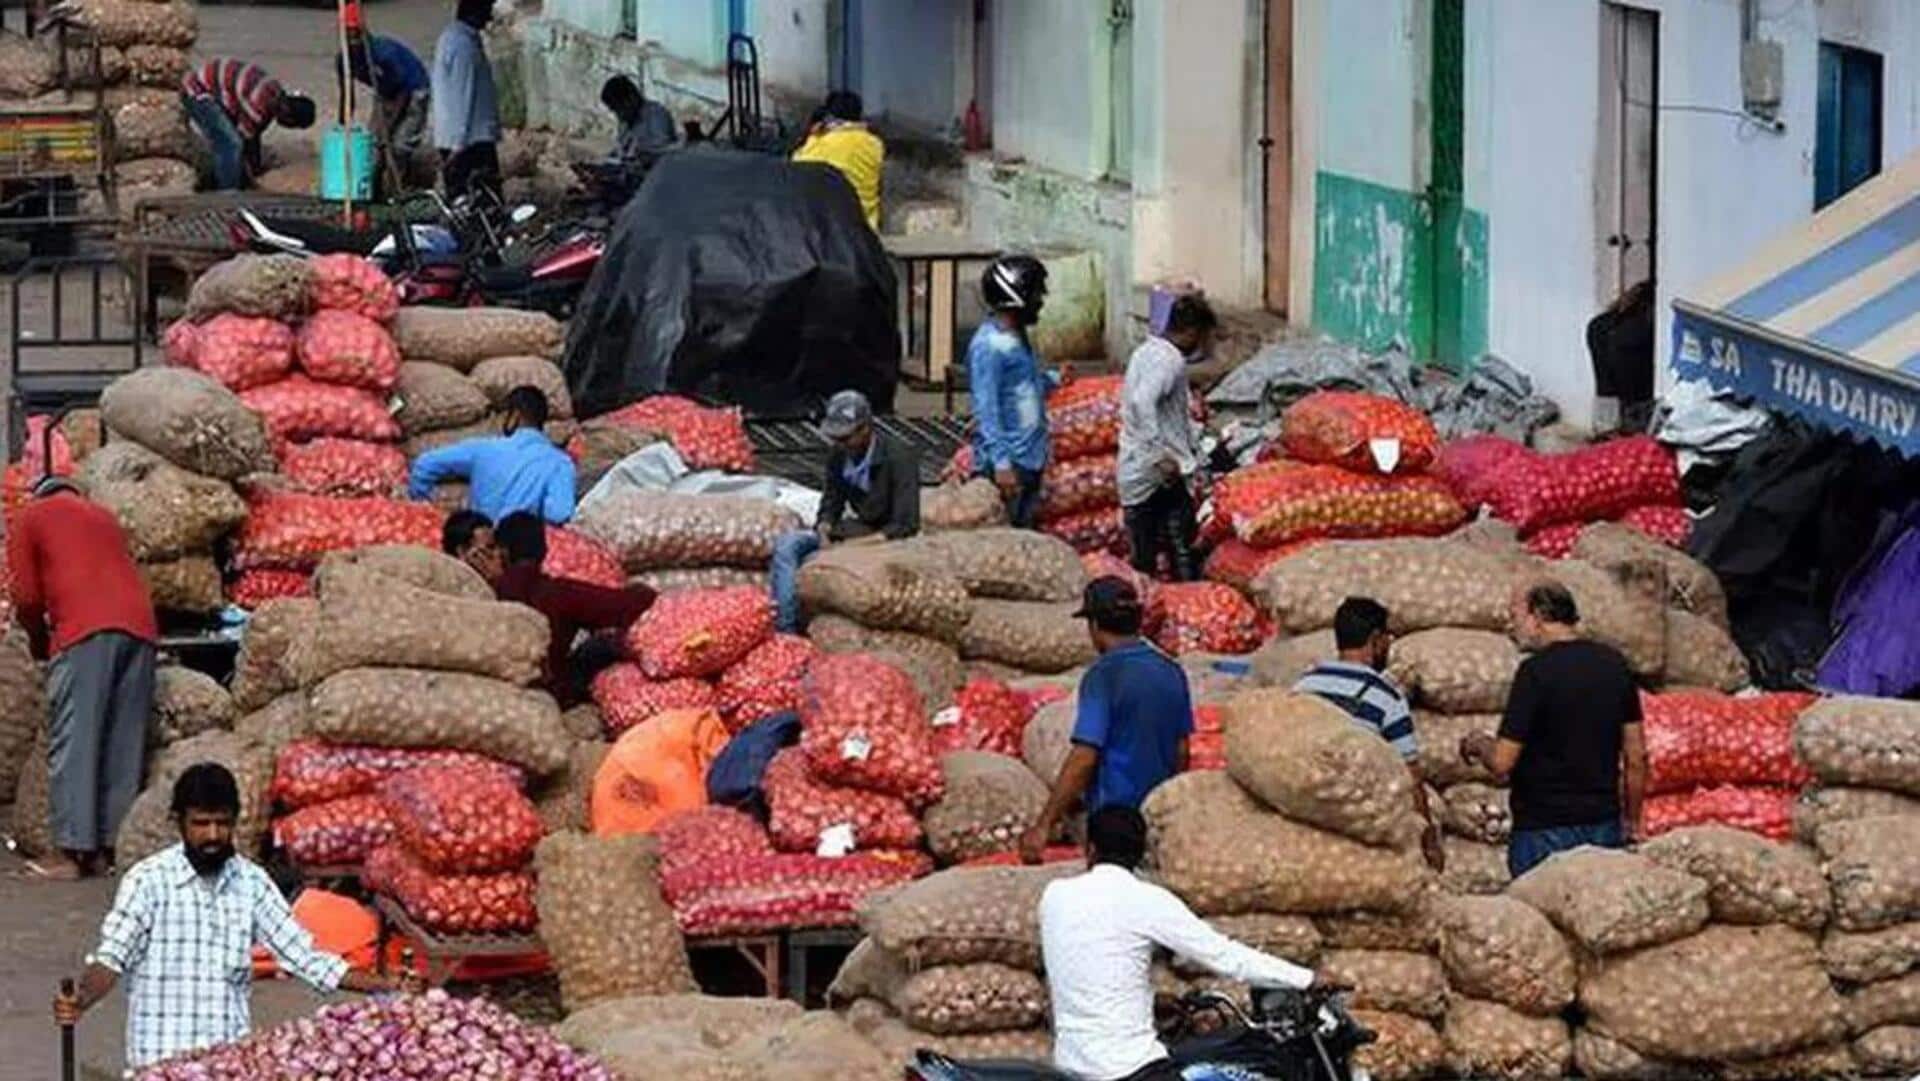 Wholesale inflation stays negative for 7th consecutive month in October